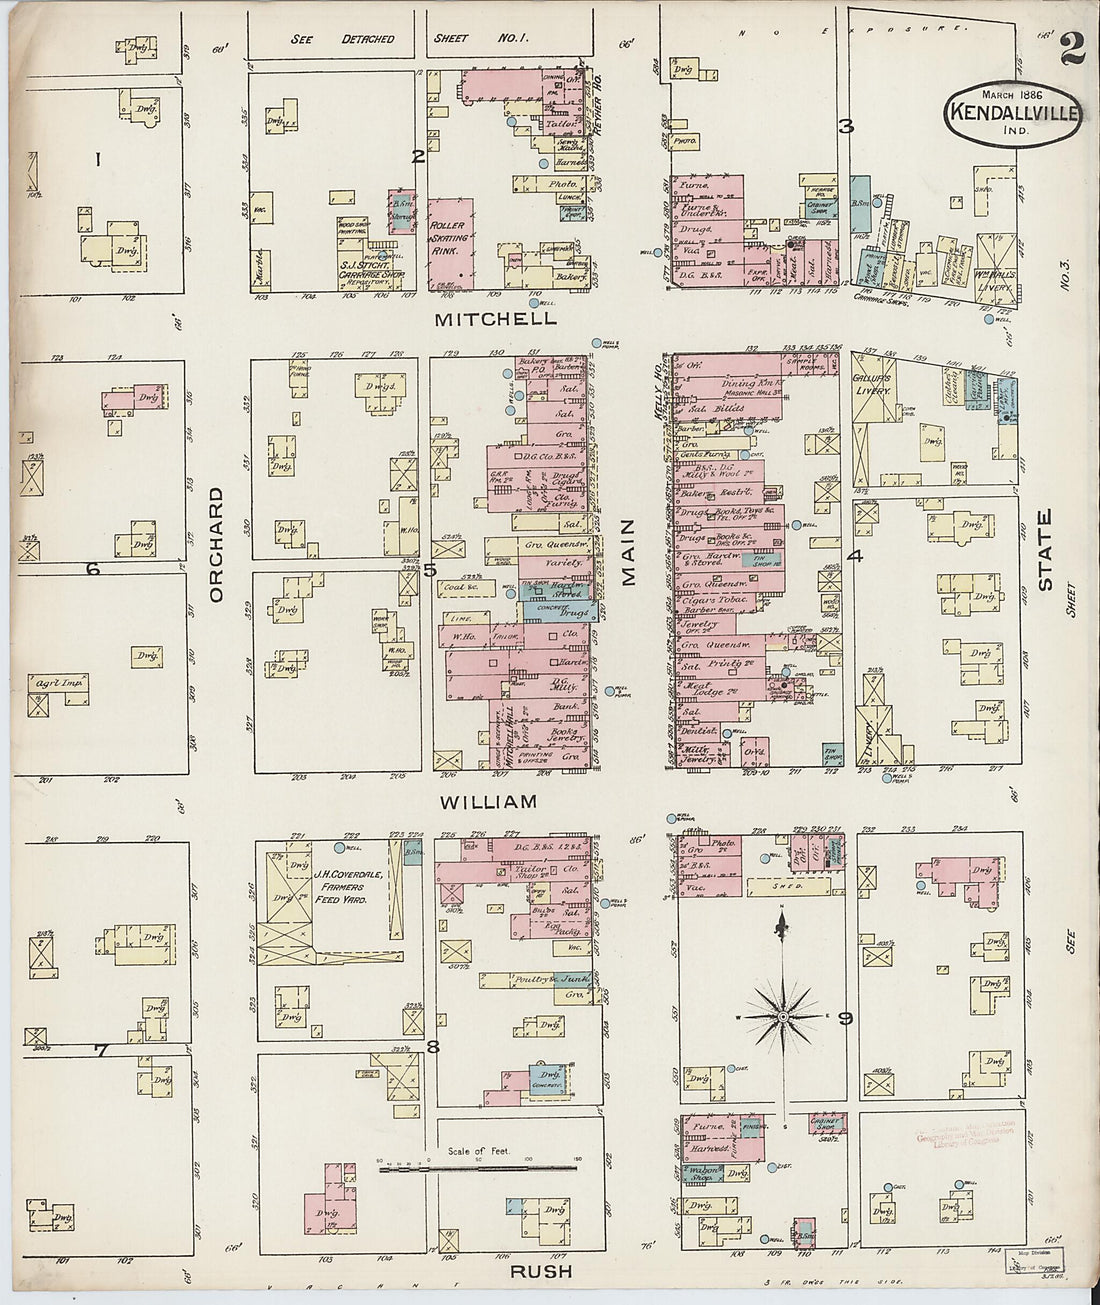 This old map of Kendallville, Noble County, Indiana was created by Sanborn Map Company in 1886